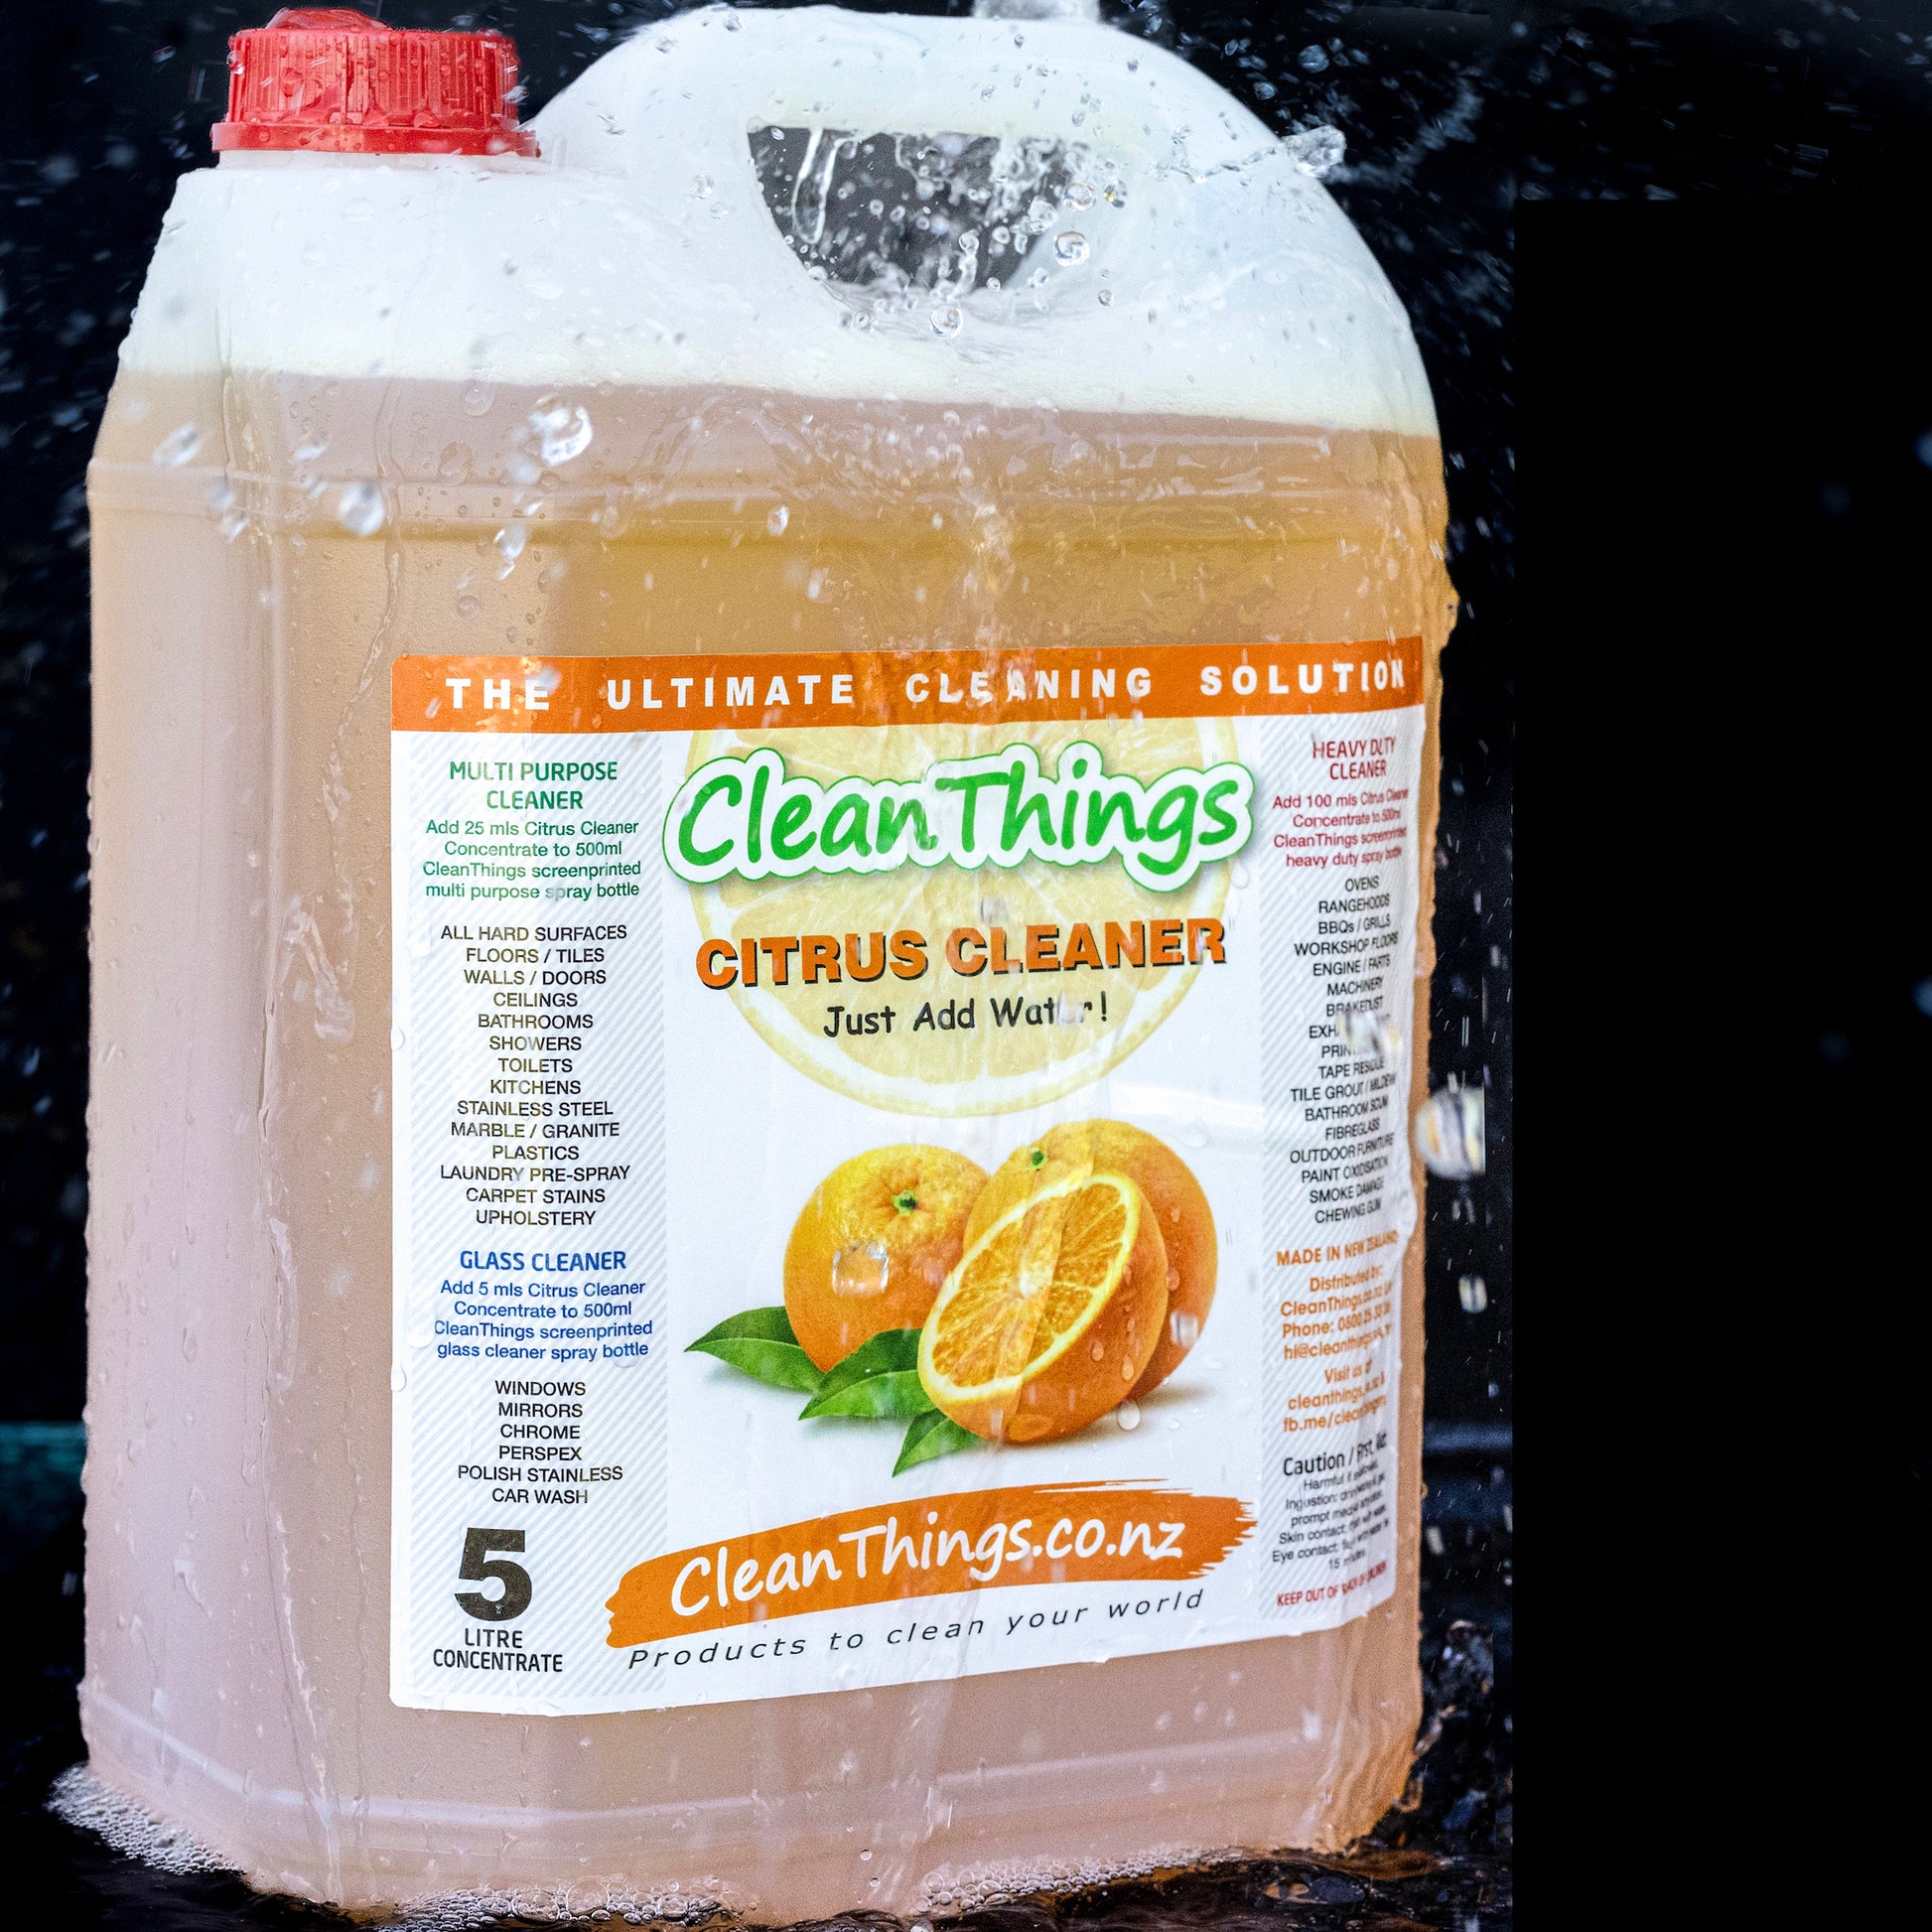 Citrus Based Cleaner Concentrate 5 litres just add water & clean almost anything. makes 100 litres multi purpose cleaner